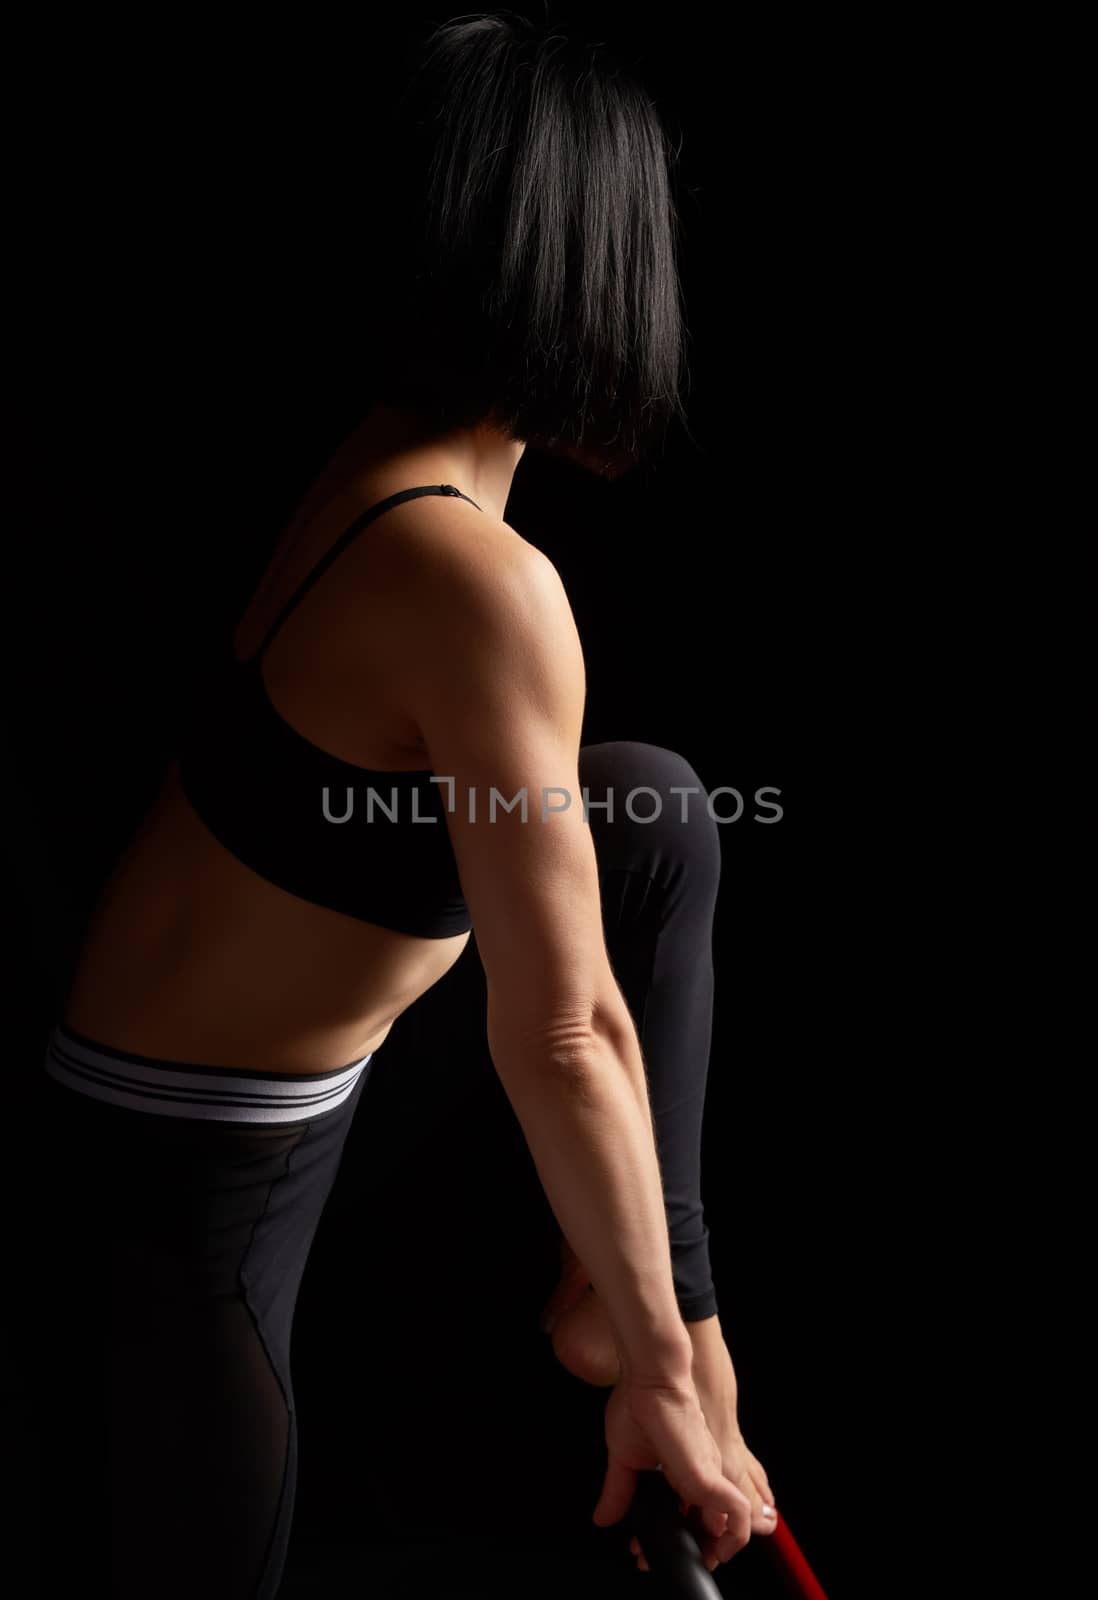 girl with a sports figure short black hair does sports exercises on the simulator, dark background, athlete stands sideways